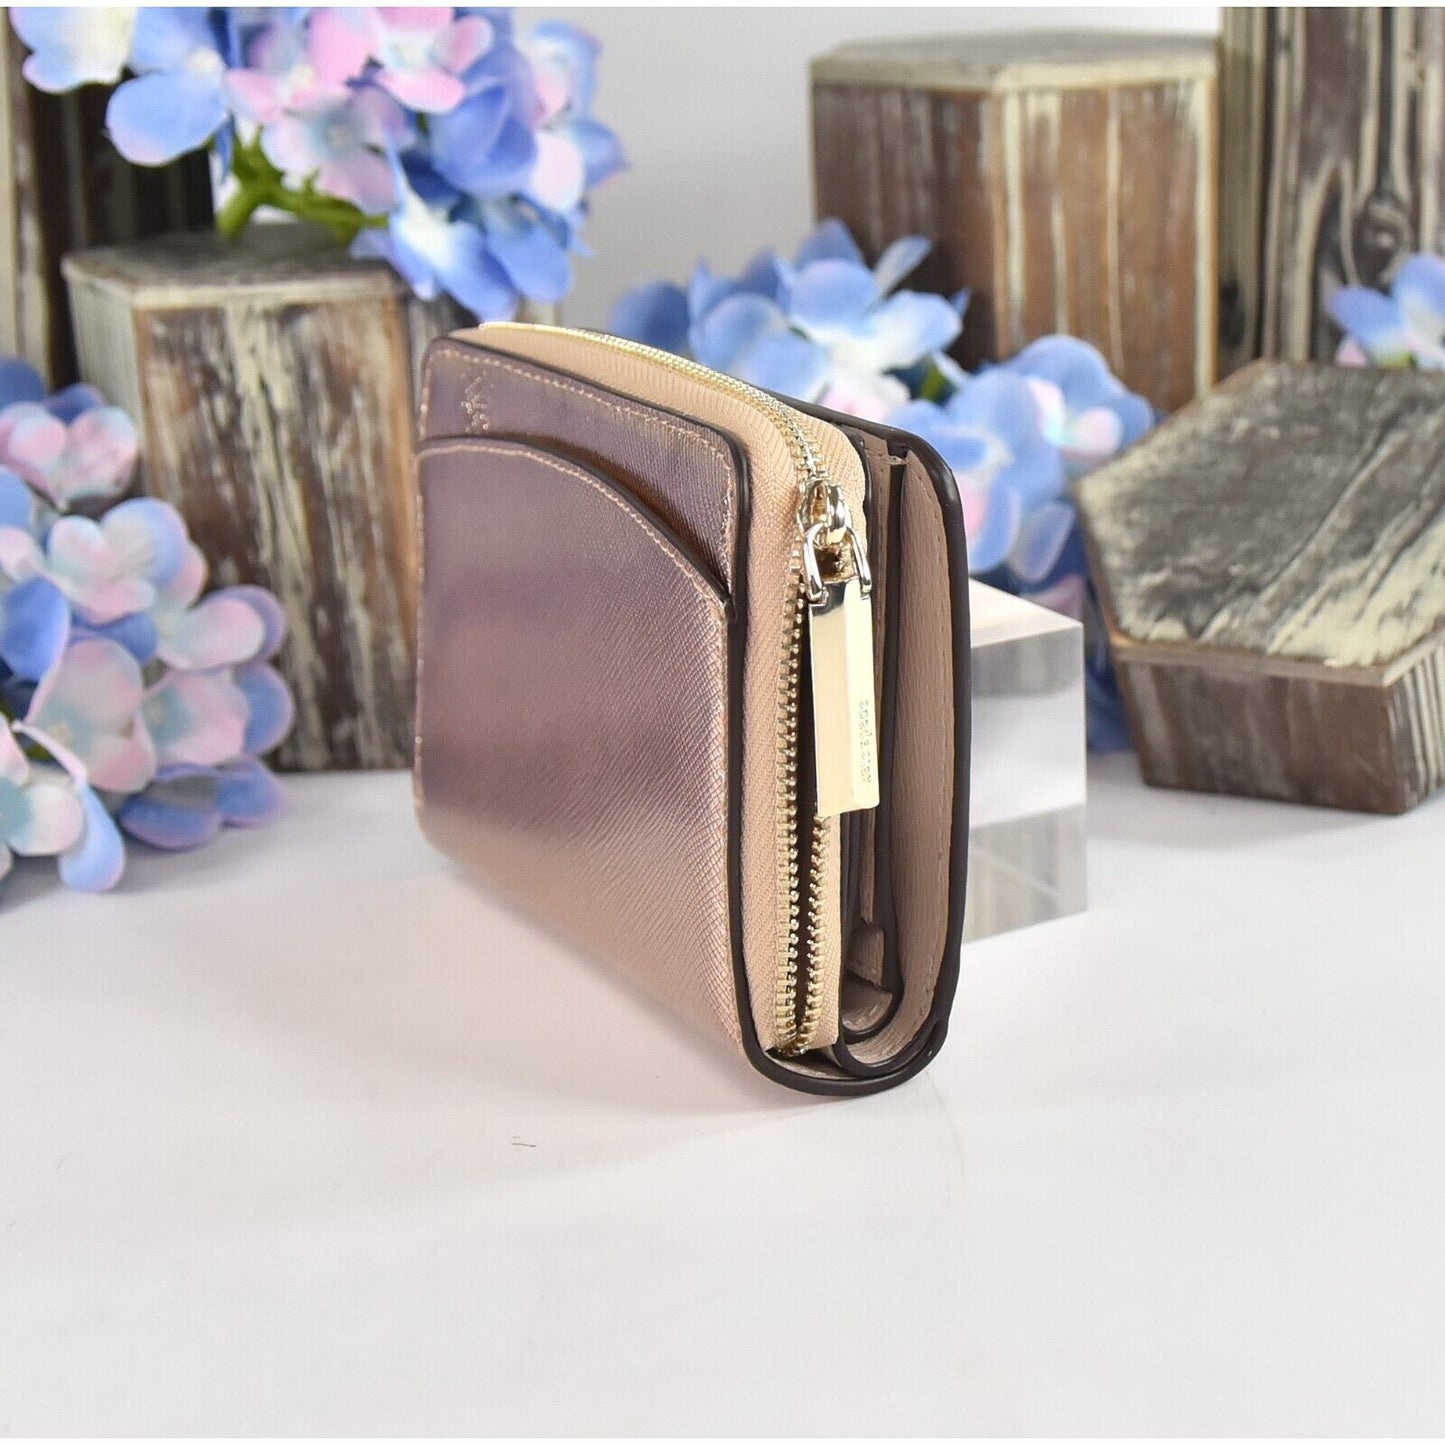 Kate Spade Rose Gold Leather Spencer Compact Wallet NWT